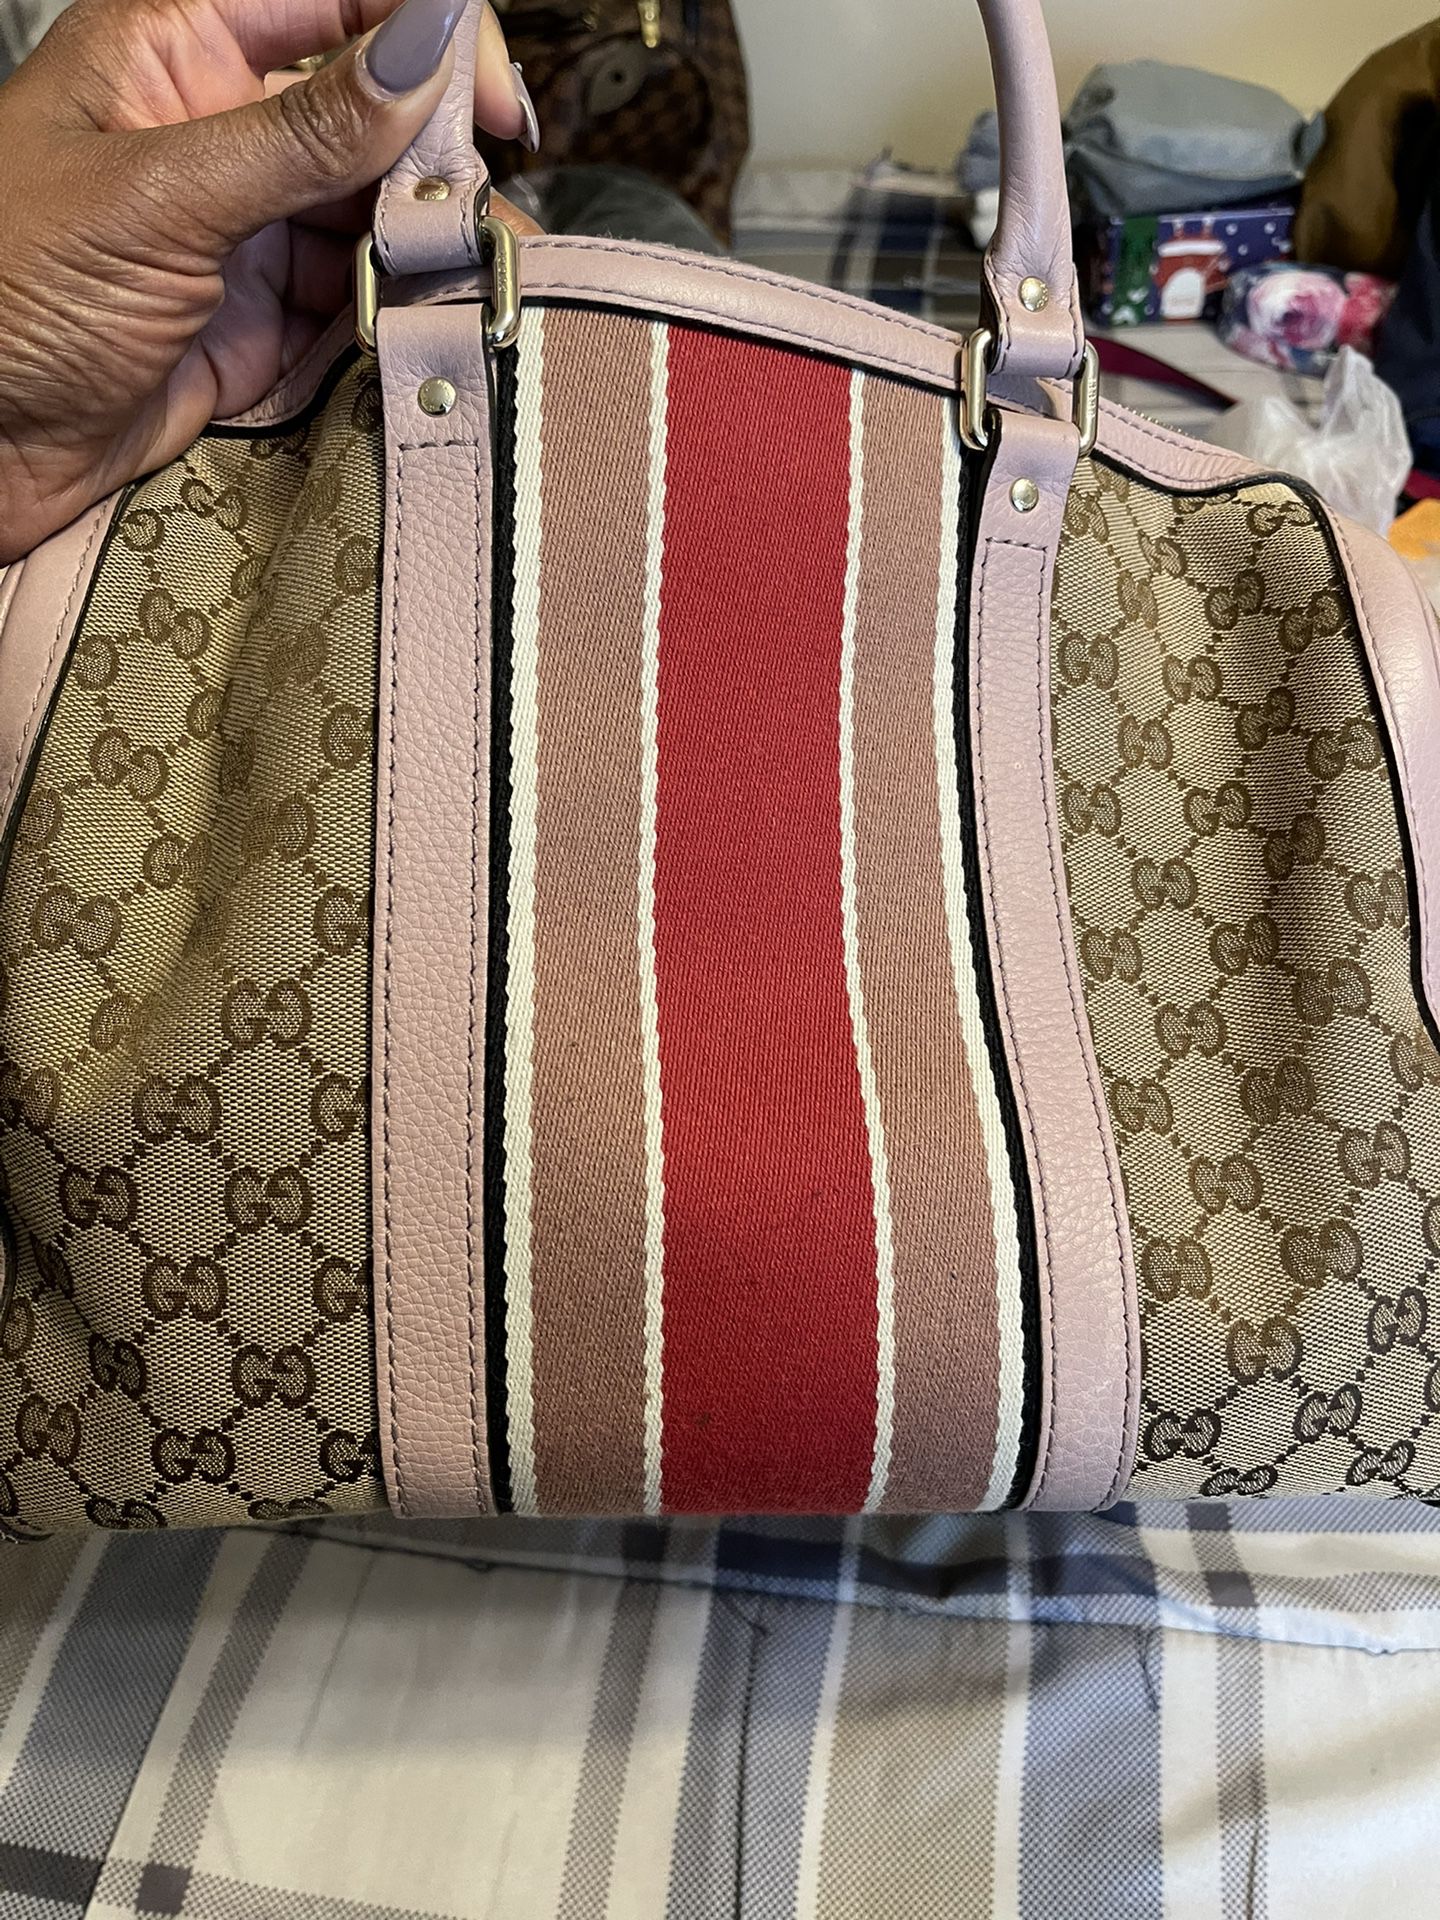 Serious Buyers Only! Authentic Gucci Bag